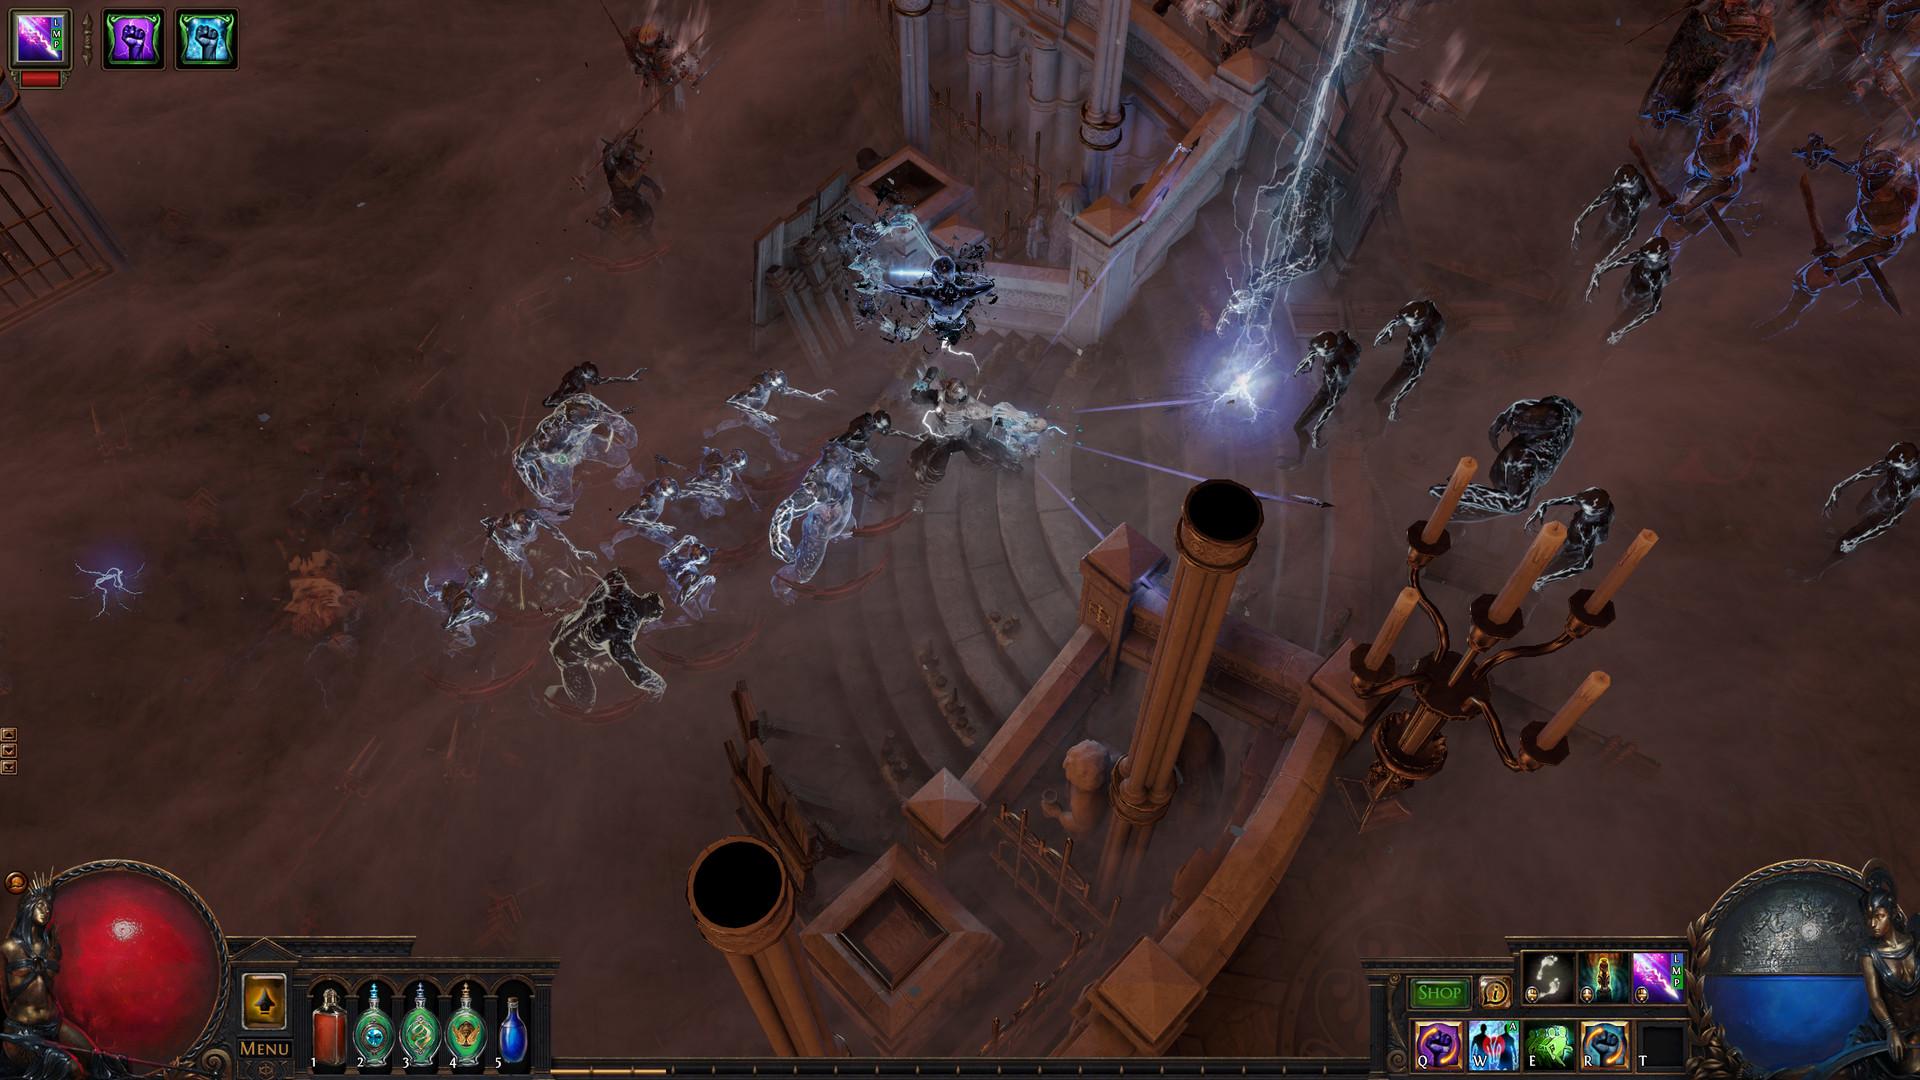 Screenshot №21 from game Path of Exile